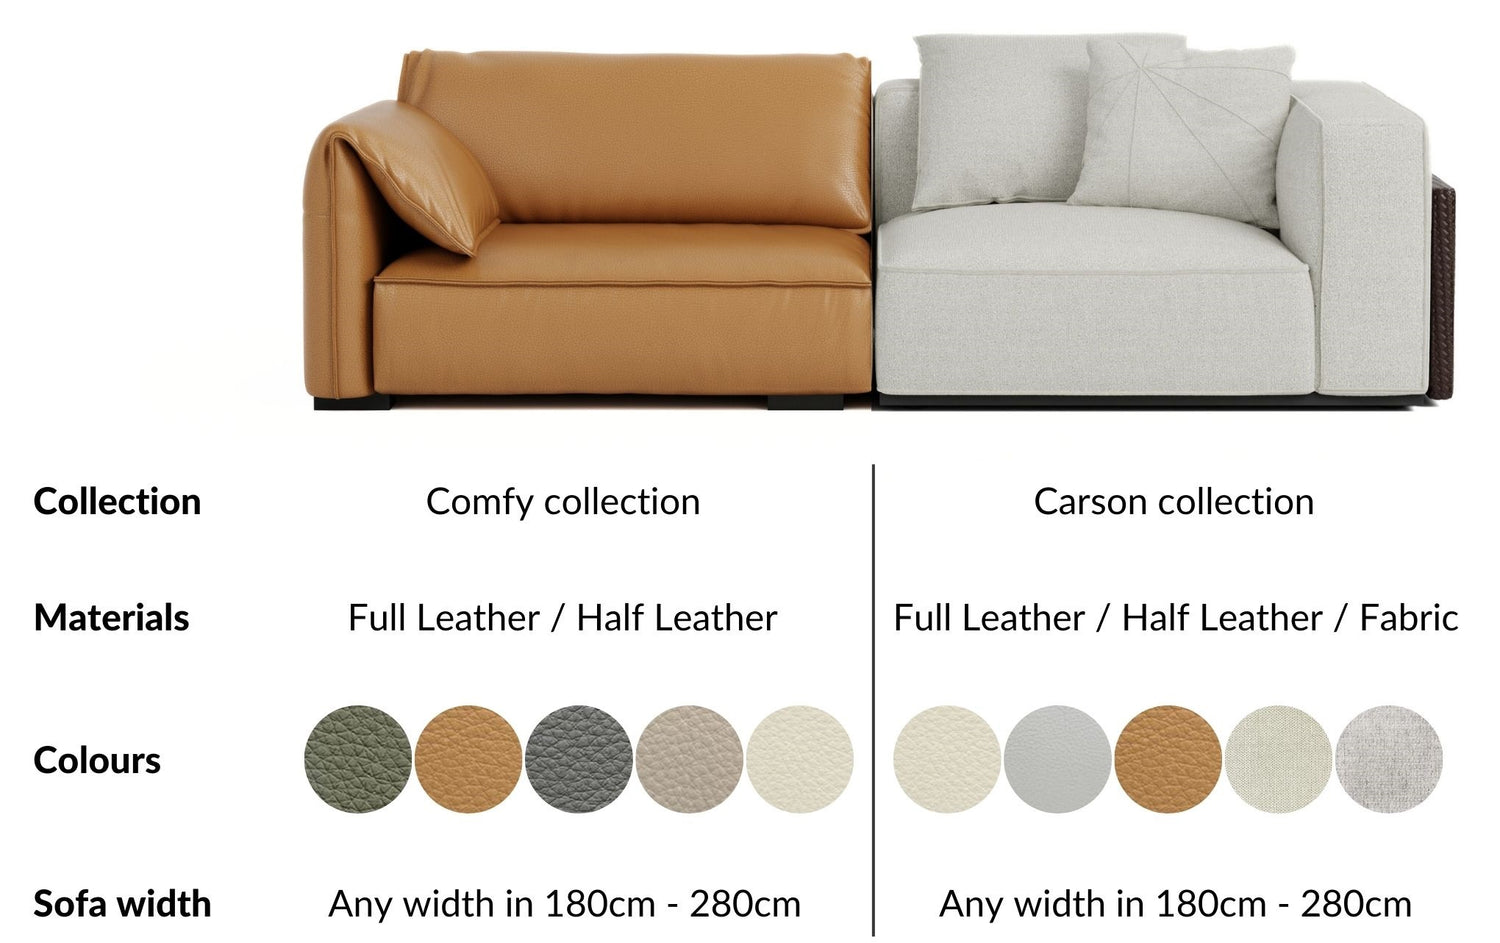 Custom made sofa not pre-made sofa, production starts after you choose the size, material (fabric, half-leather, full-leather) and colours of the sofa